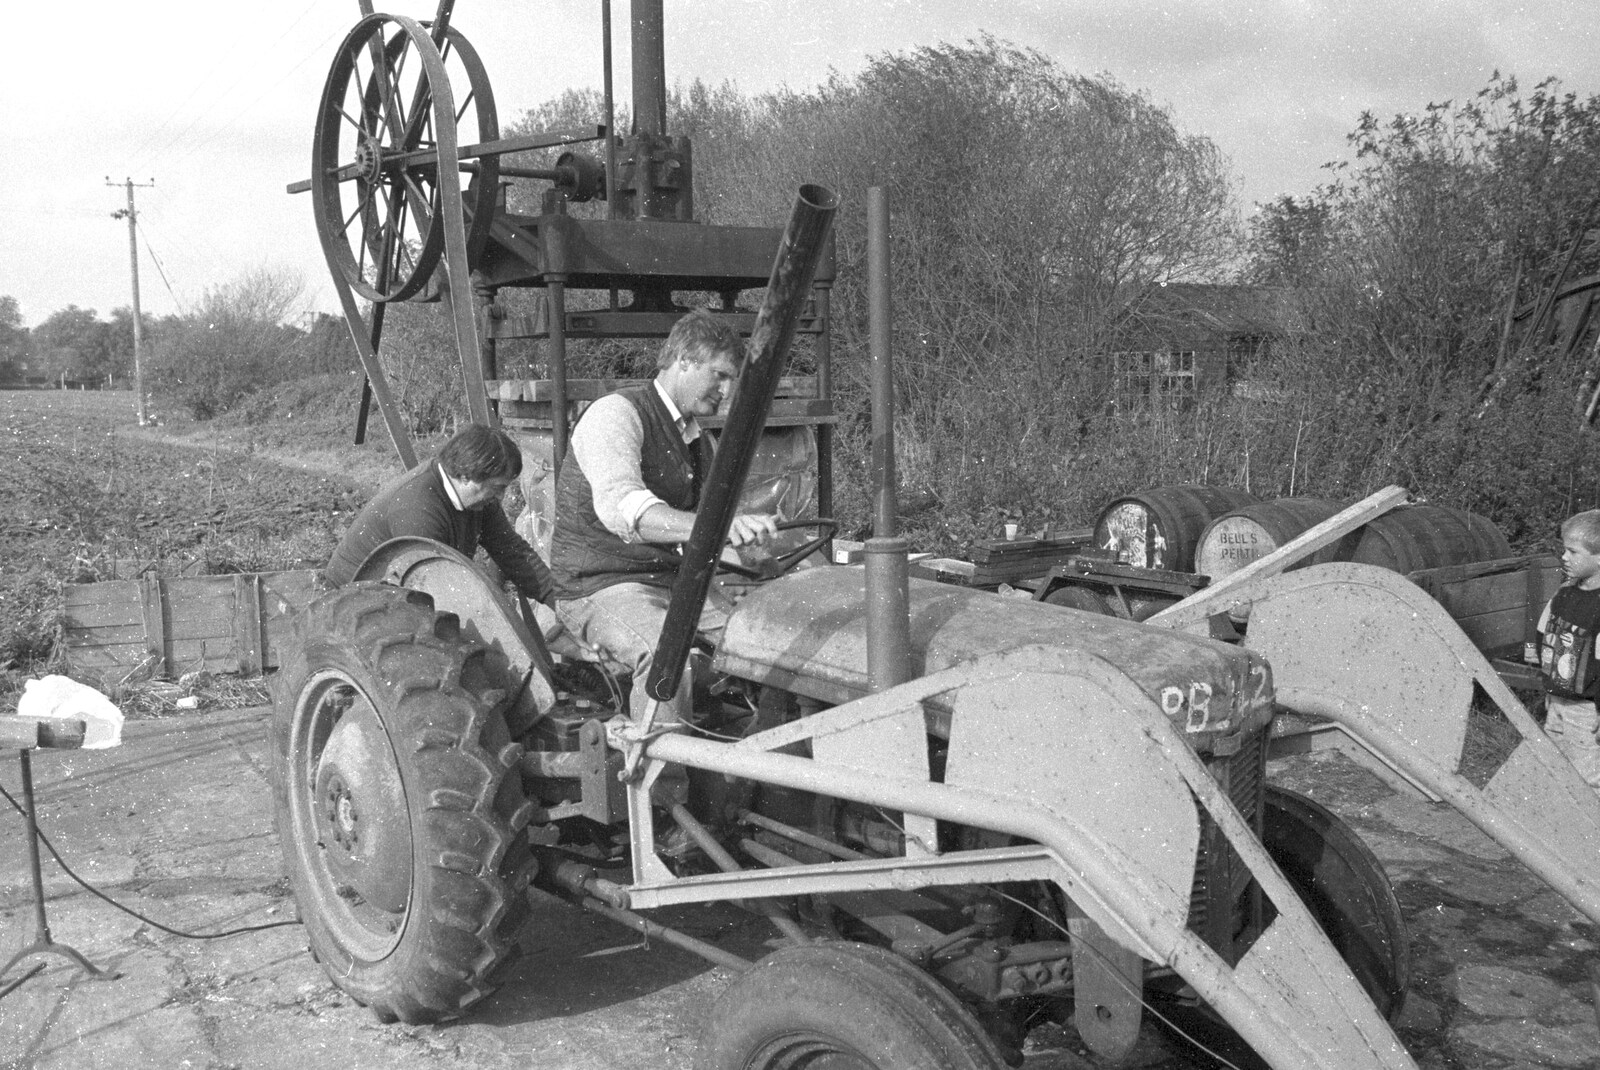 Geoff fires up Winnie the TE-120 from Cider Making in Black and White, Stuston, Suffolk - 11th October 1992